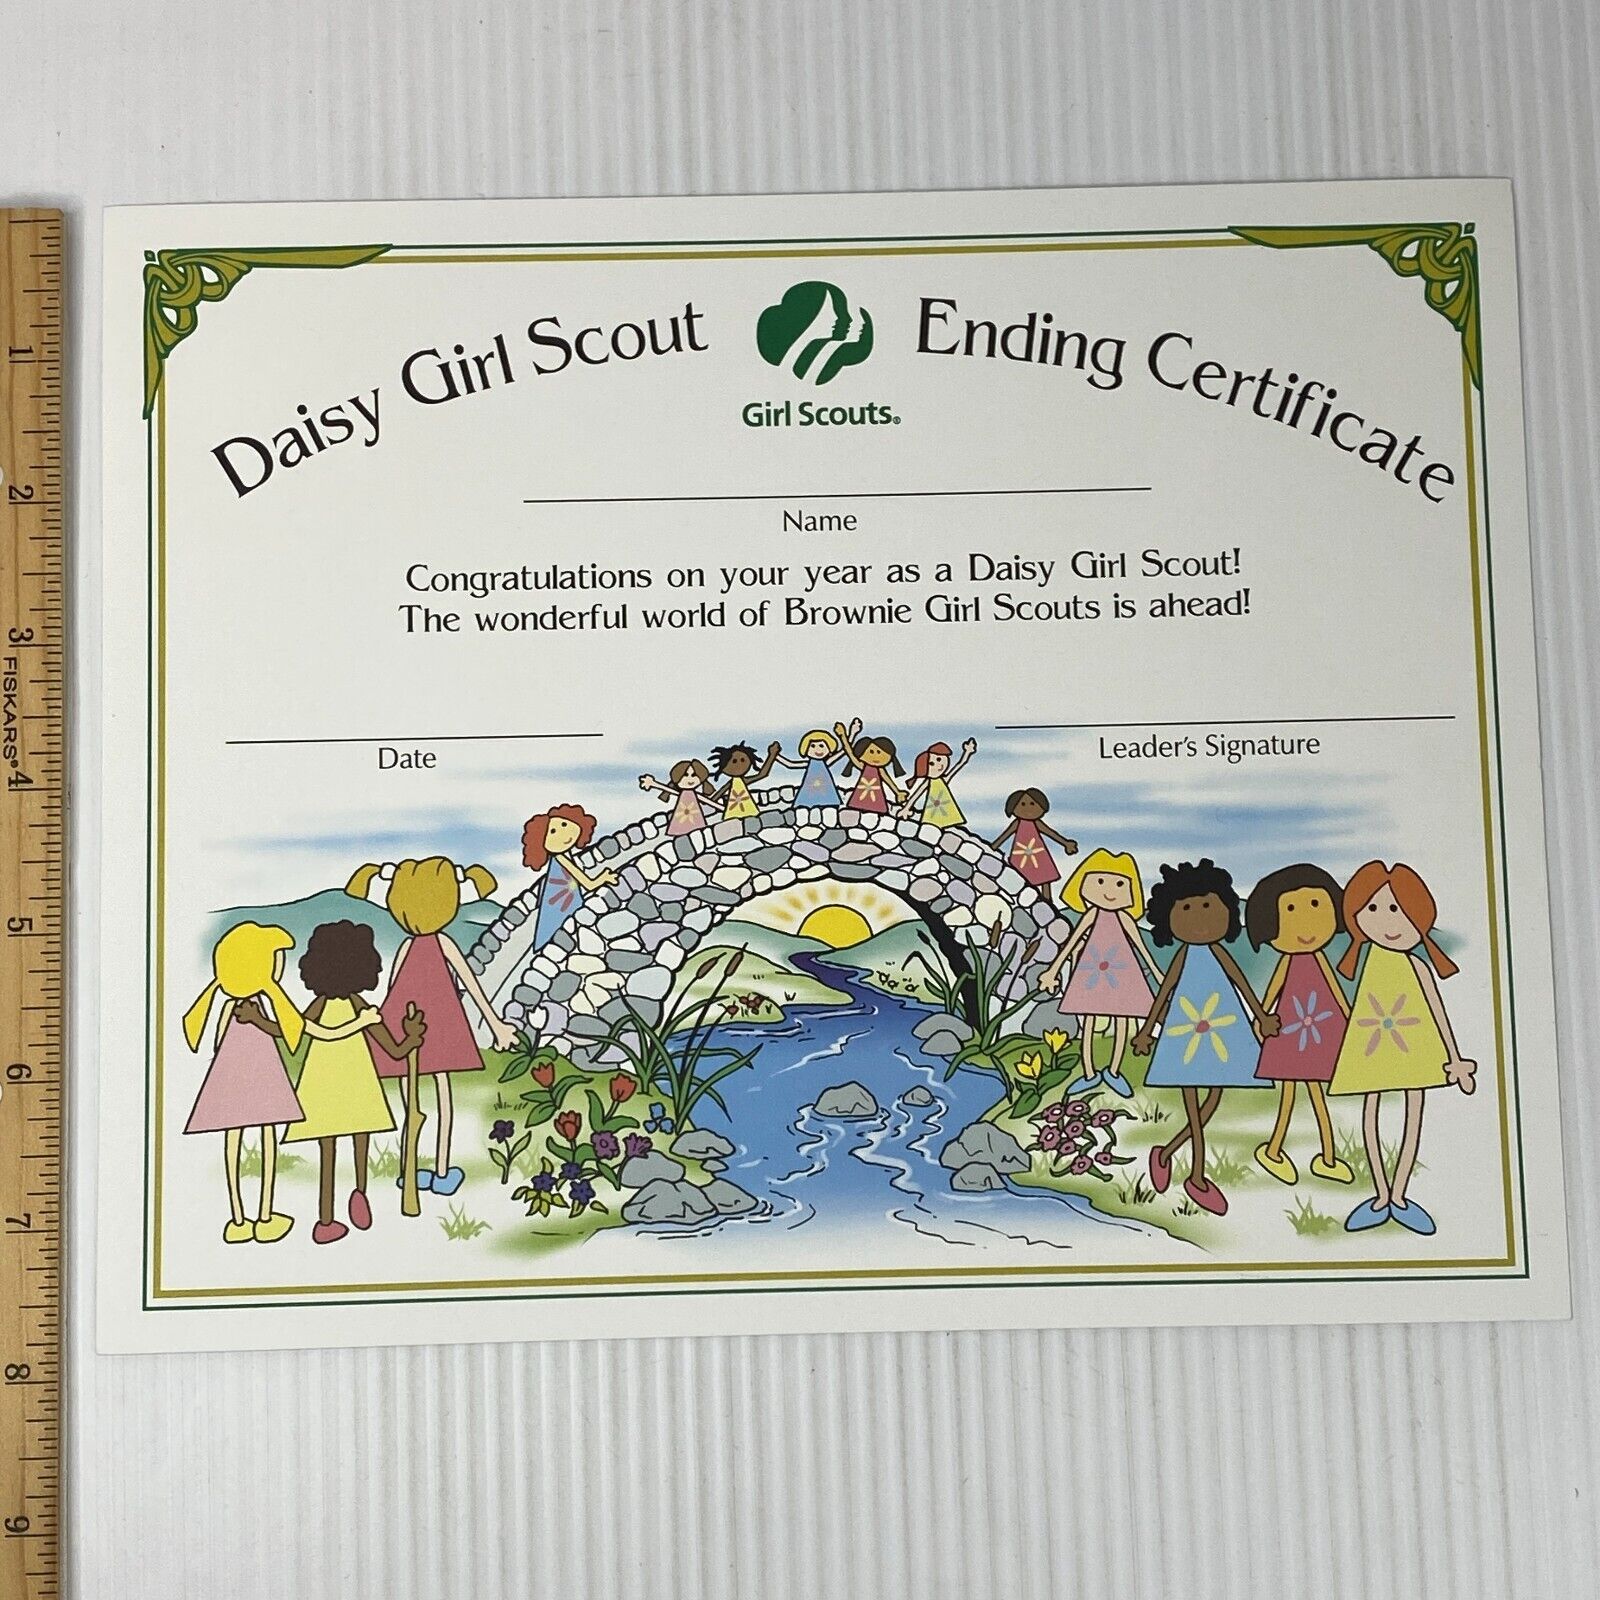 Daisy Girl Scout Ending Certificate Card Stock 10in x 8in